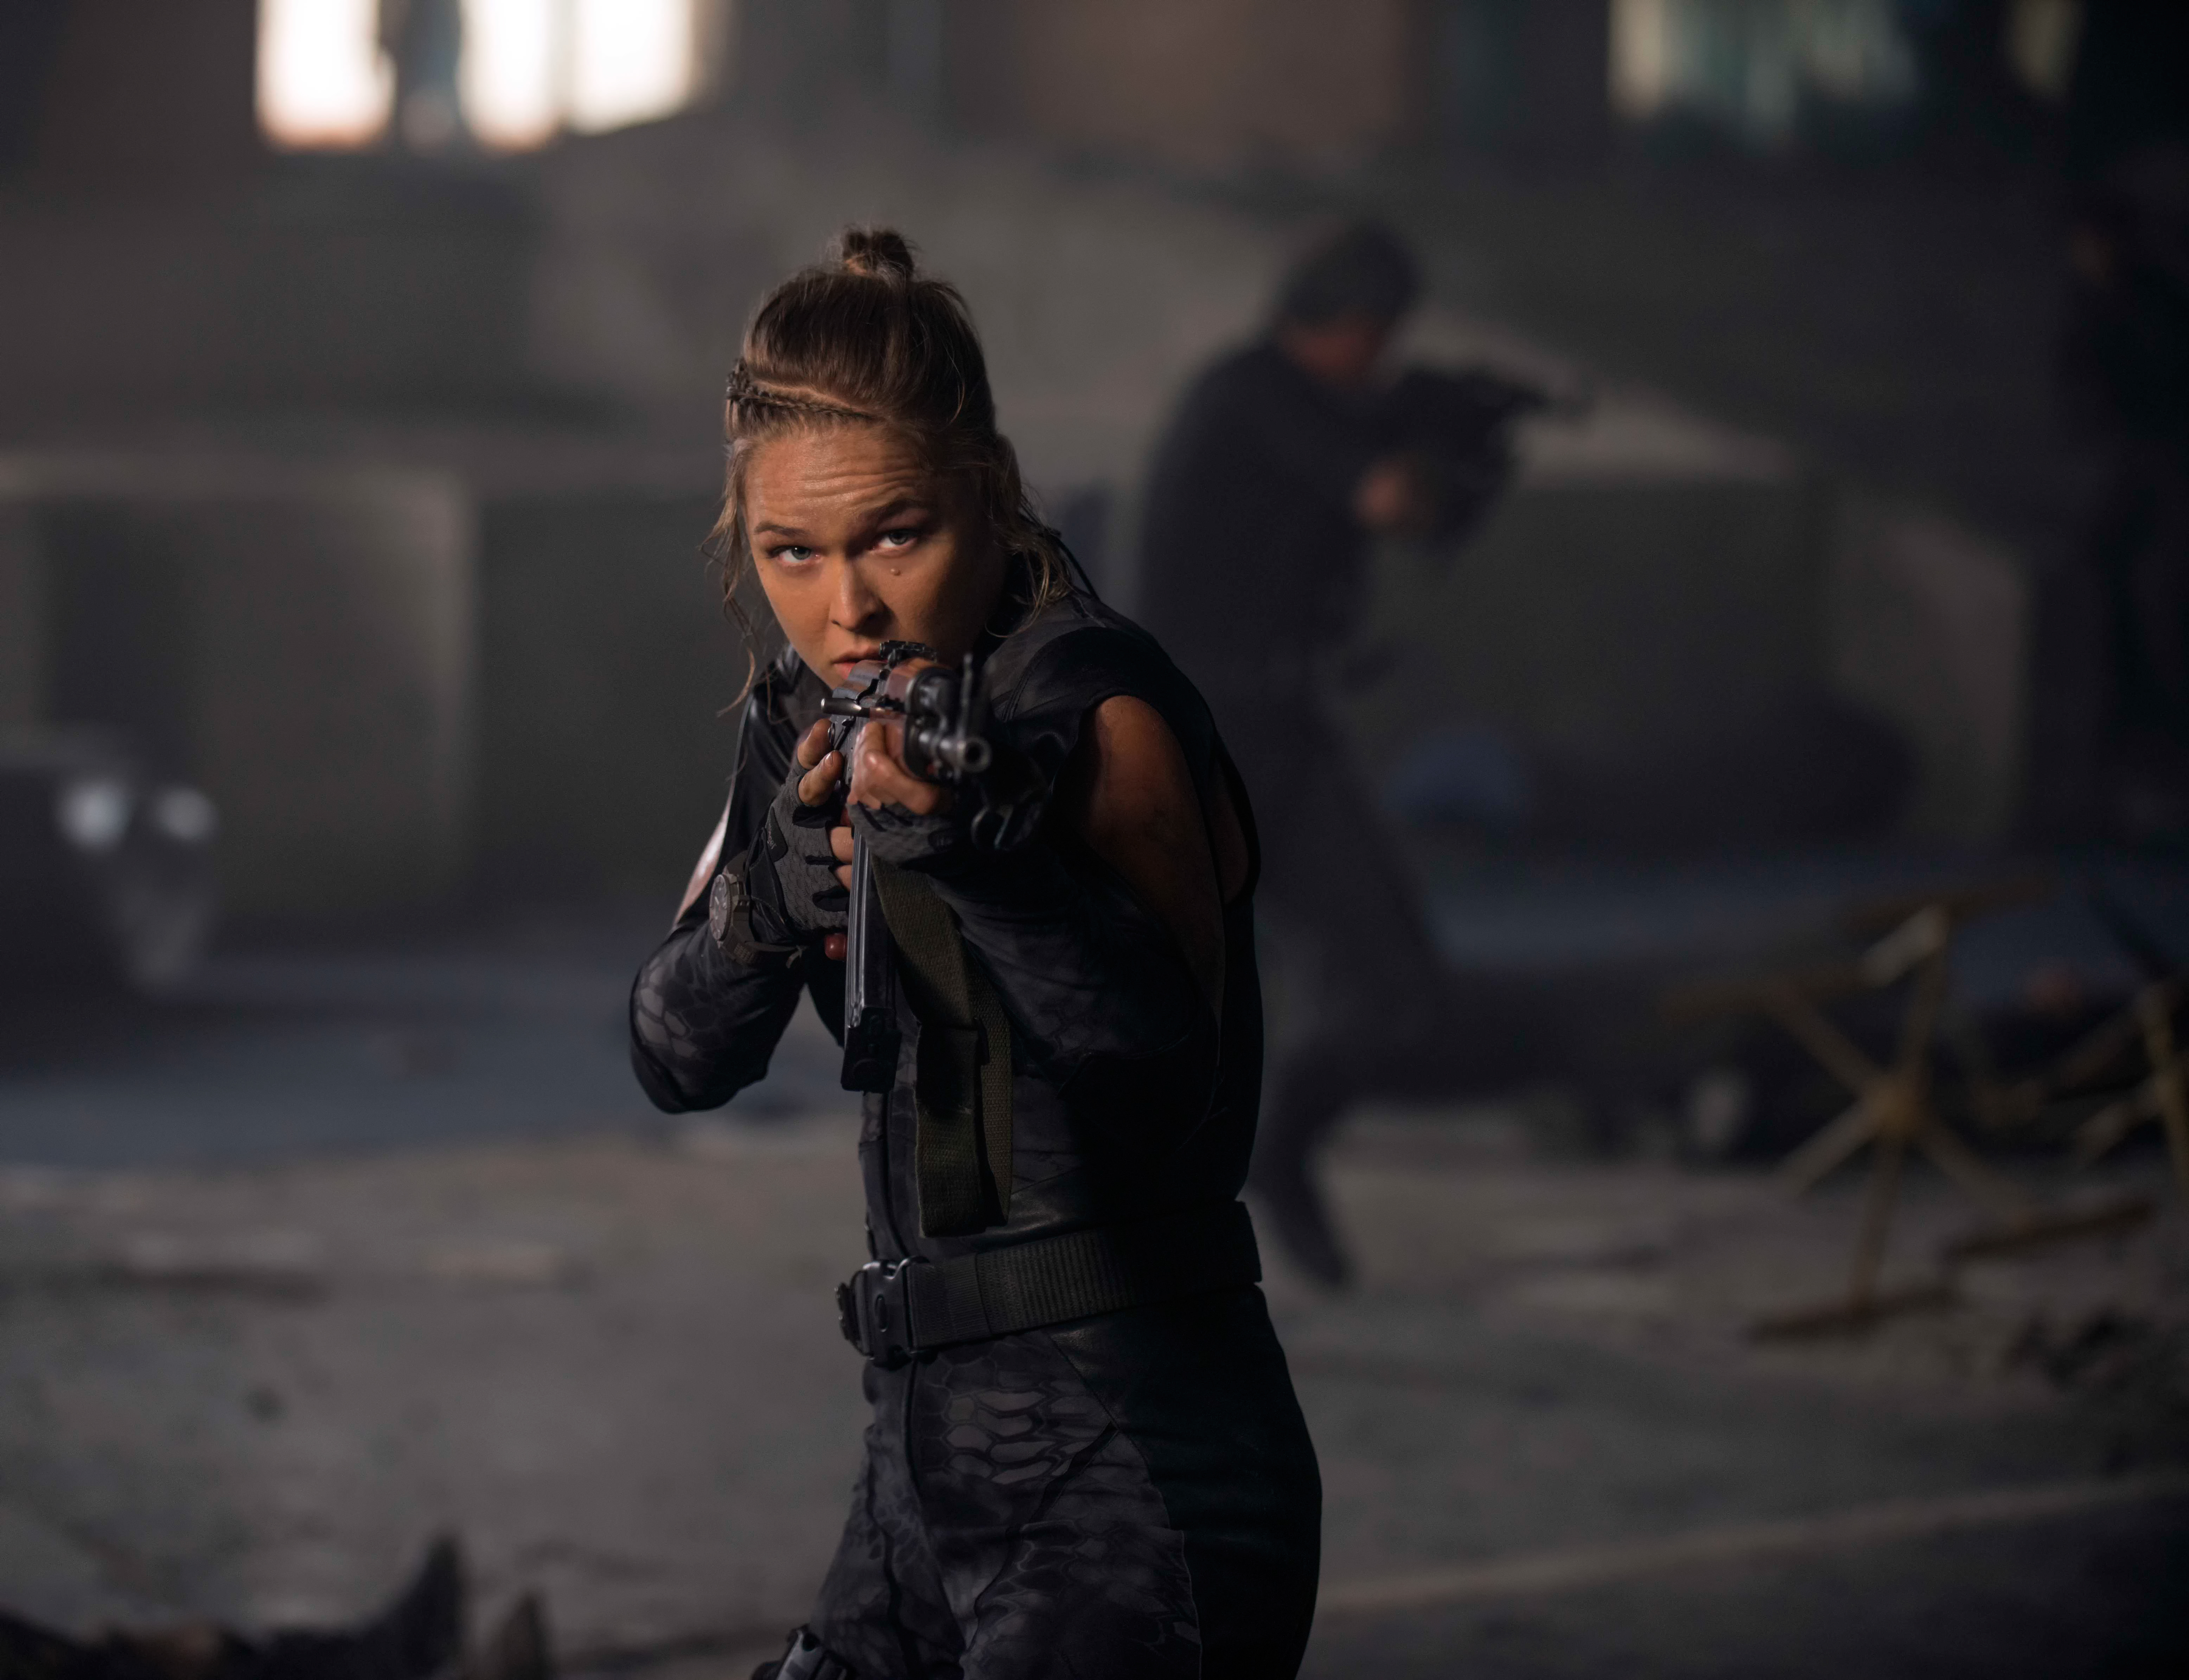 ronda rousey, movie, the expendables 3, luna (the expendables), the expendables